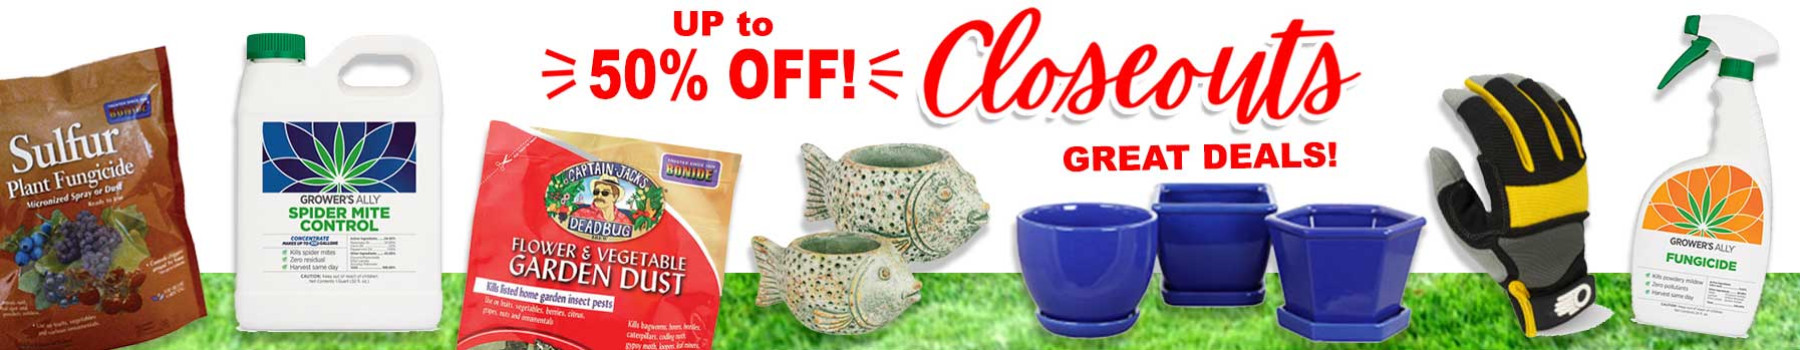 WHOLESALE CLOSEOUTS HOME AND GARDEN